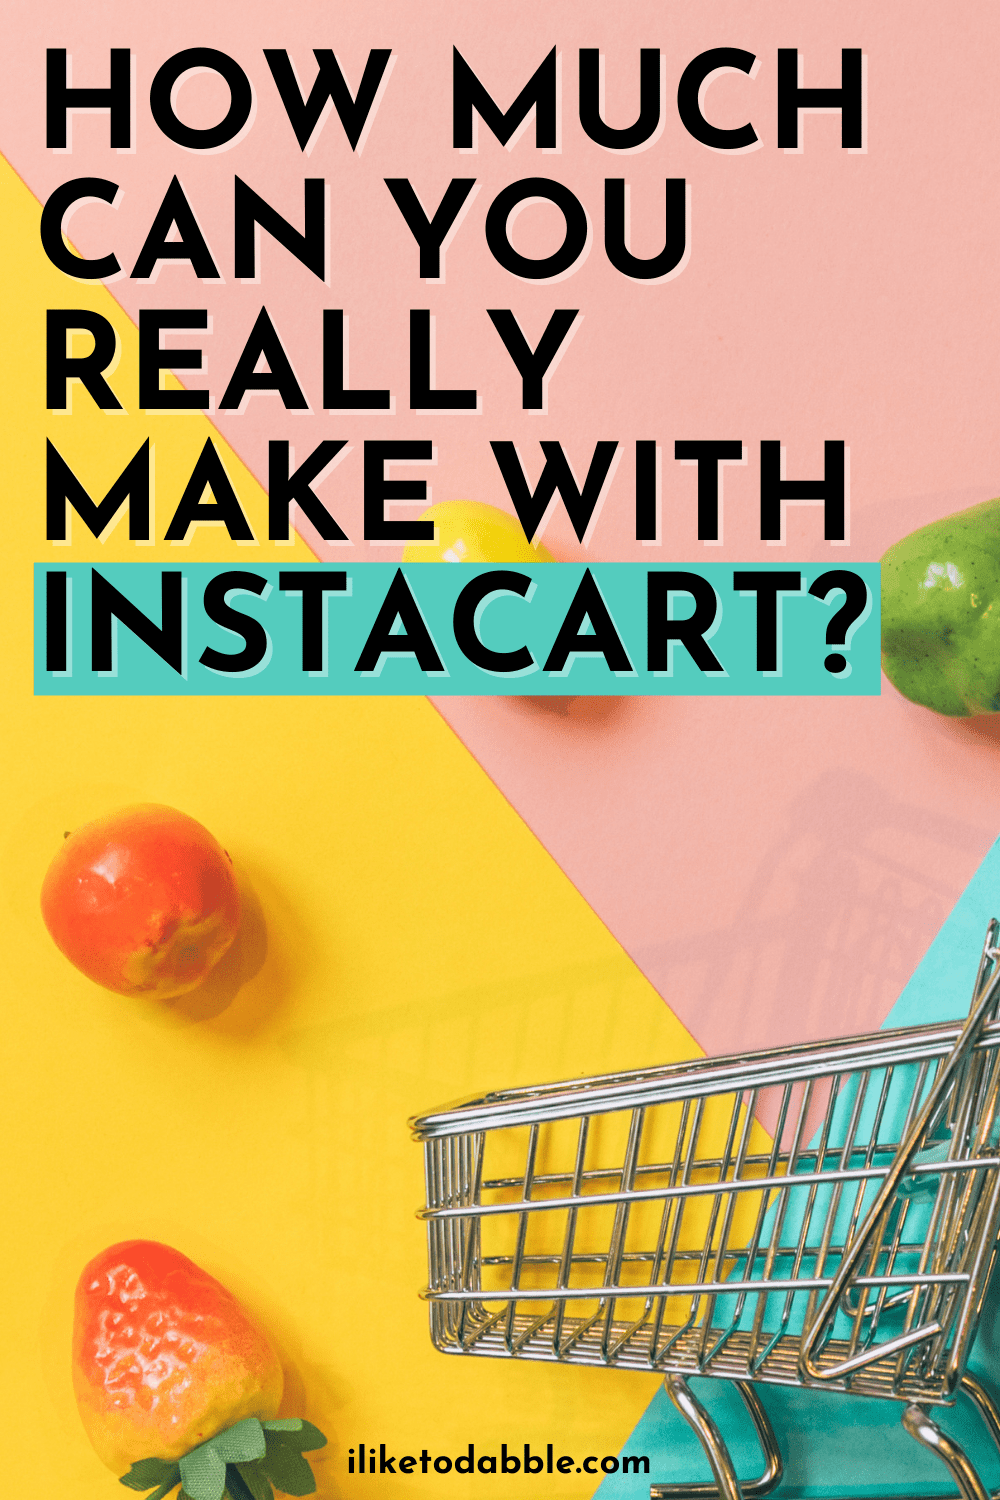 grocery cart with fruit and vegetables against a colorful background with text that reads: how much can you really make with instacart